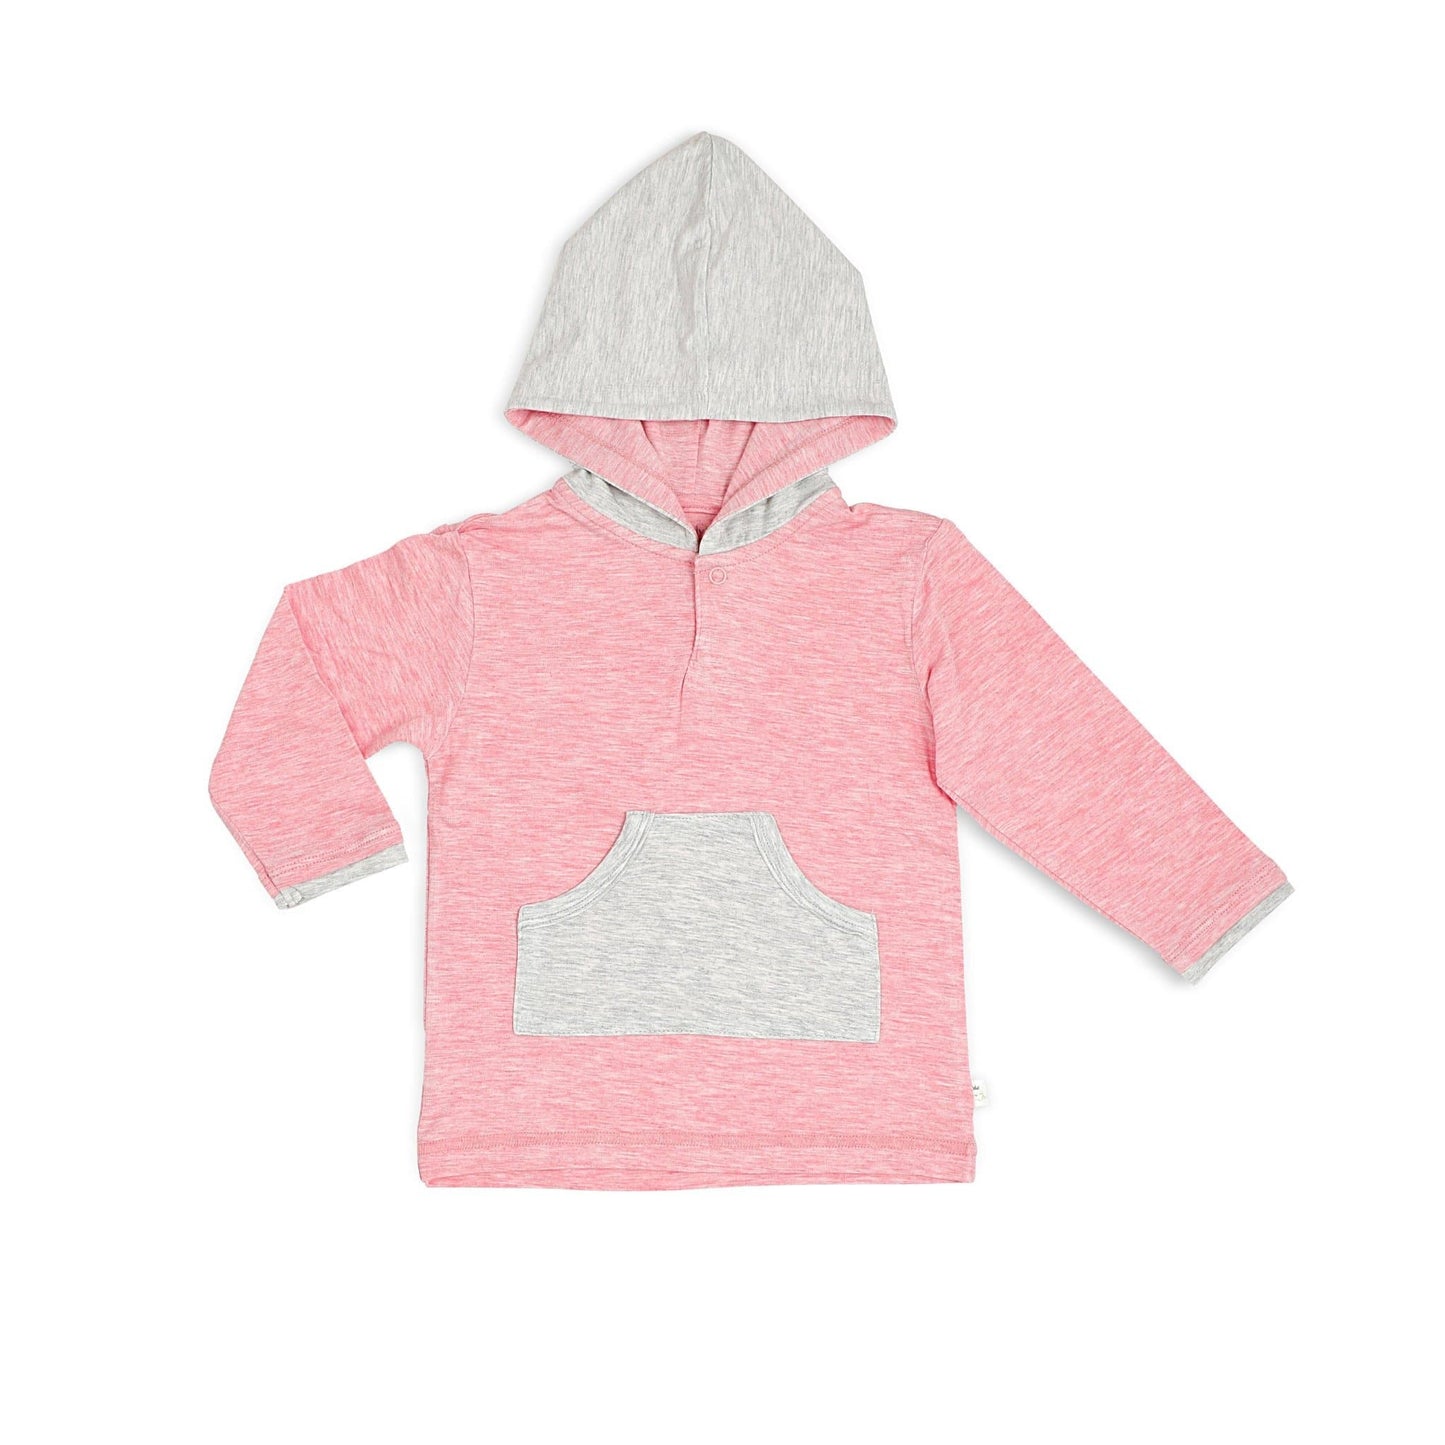 Girls' Hoodie with Pockets by simplylifebaby